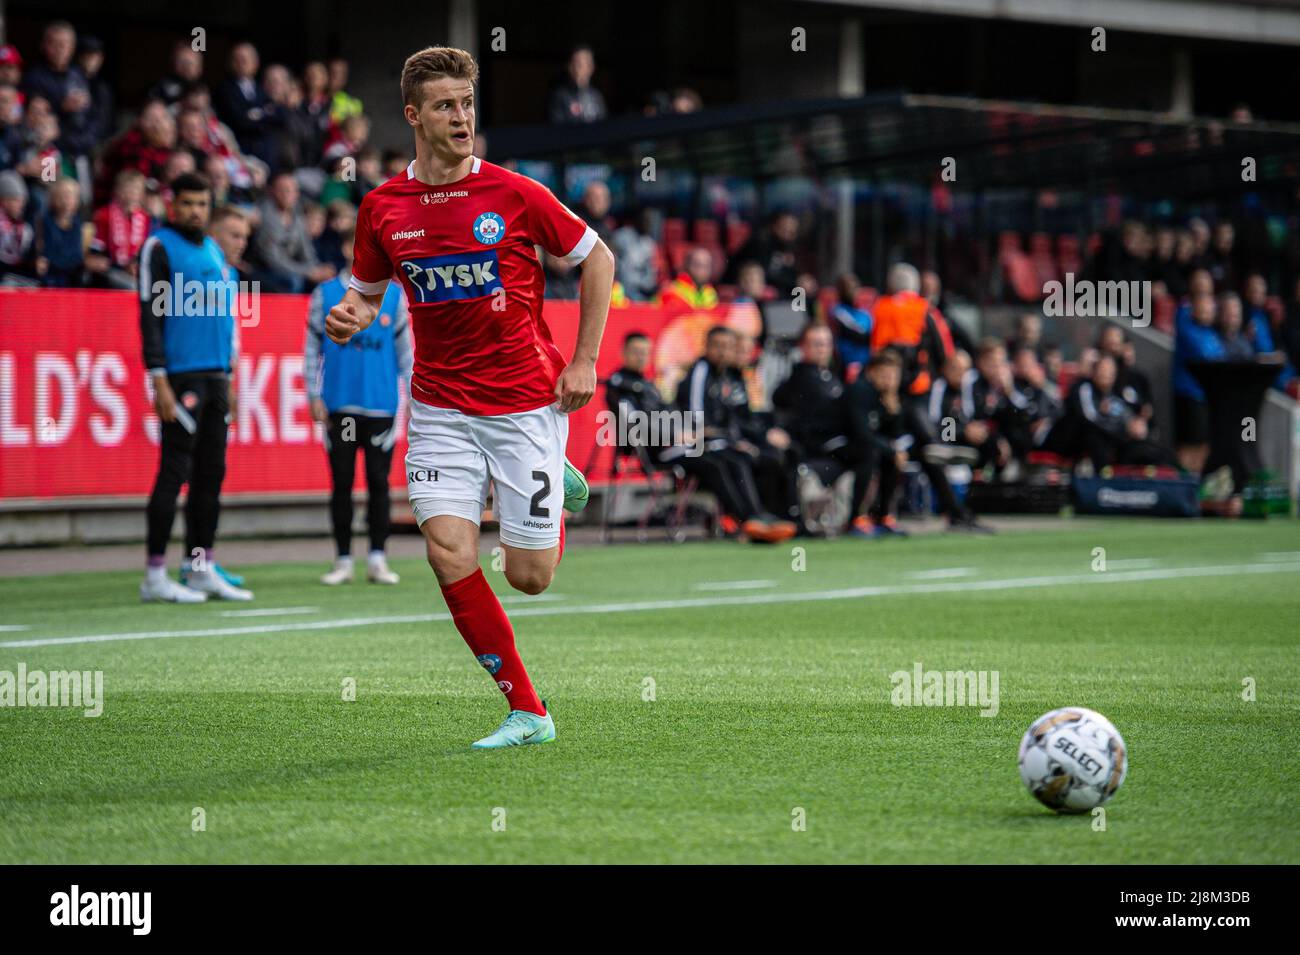 Silkeborg, Denmark. 16th May, 2022. Rasmus Carstensen (2) of Silkeborg IF seen during the 3F Superliga match between Silkeborg IF and FC Midtjylland at Jysk Park in Silkeborg. (Photo Credit: Gonzales Photo/Alamy Live News Stock Photo